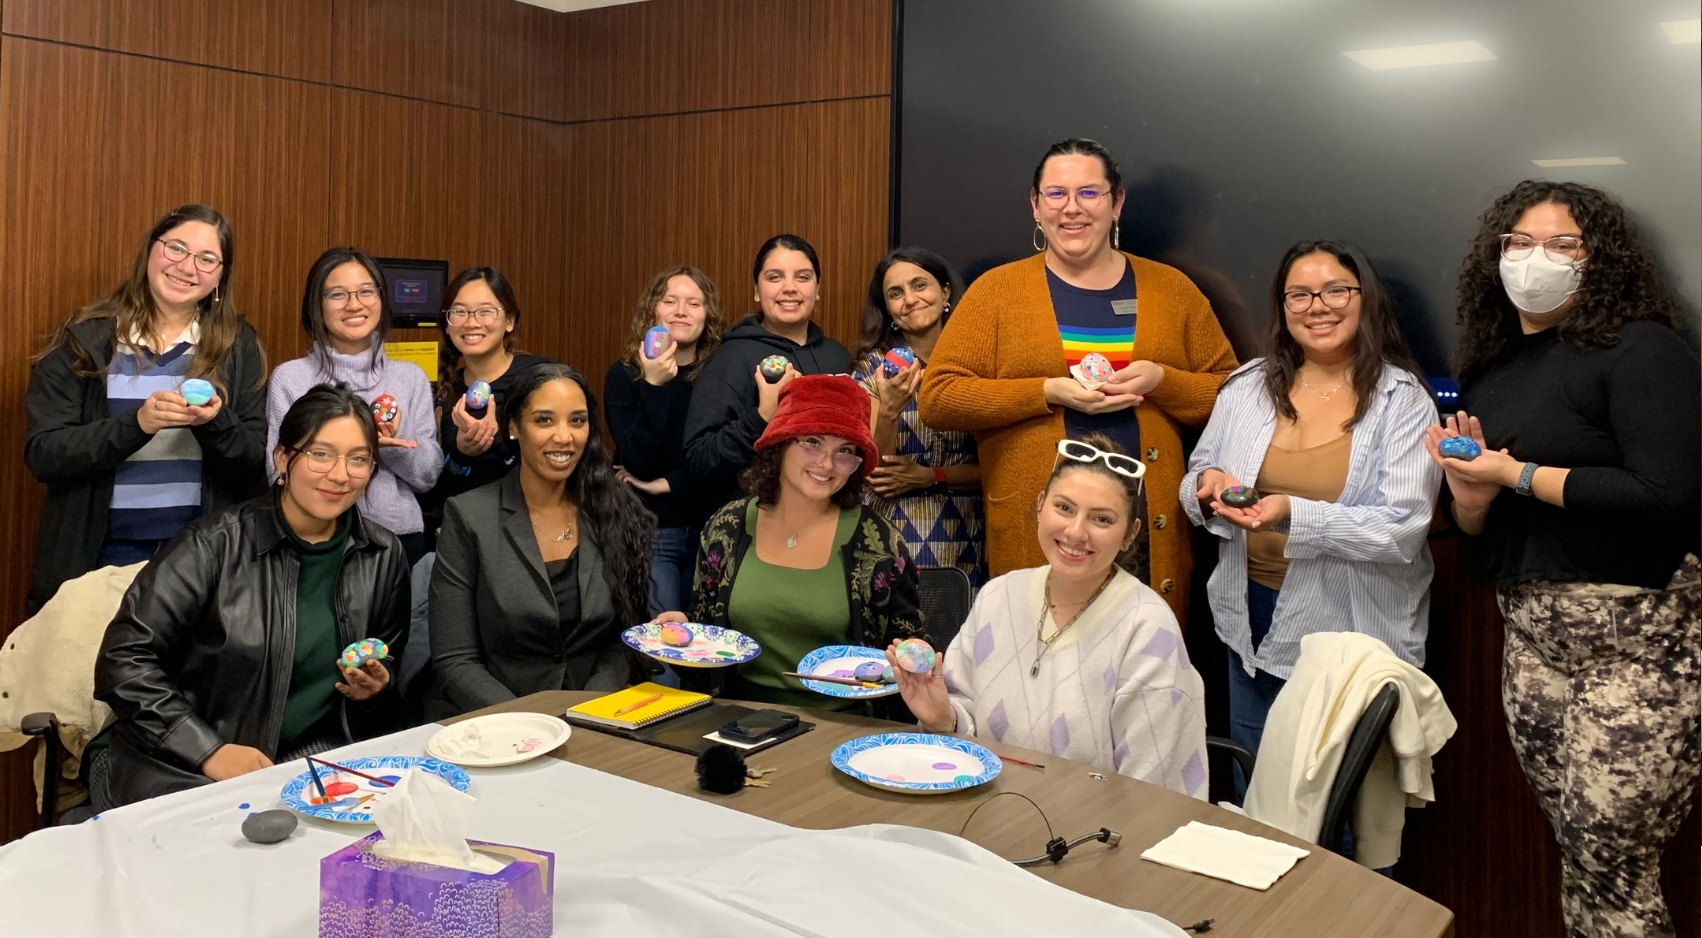 Daniela Narvaez, seated in the middle with red hat, is hosting a support group for women in STEM majors in hopes of increasing graduation and retention rates.